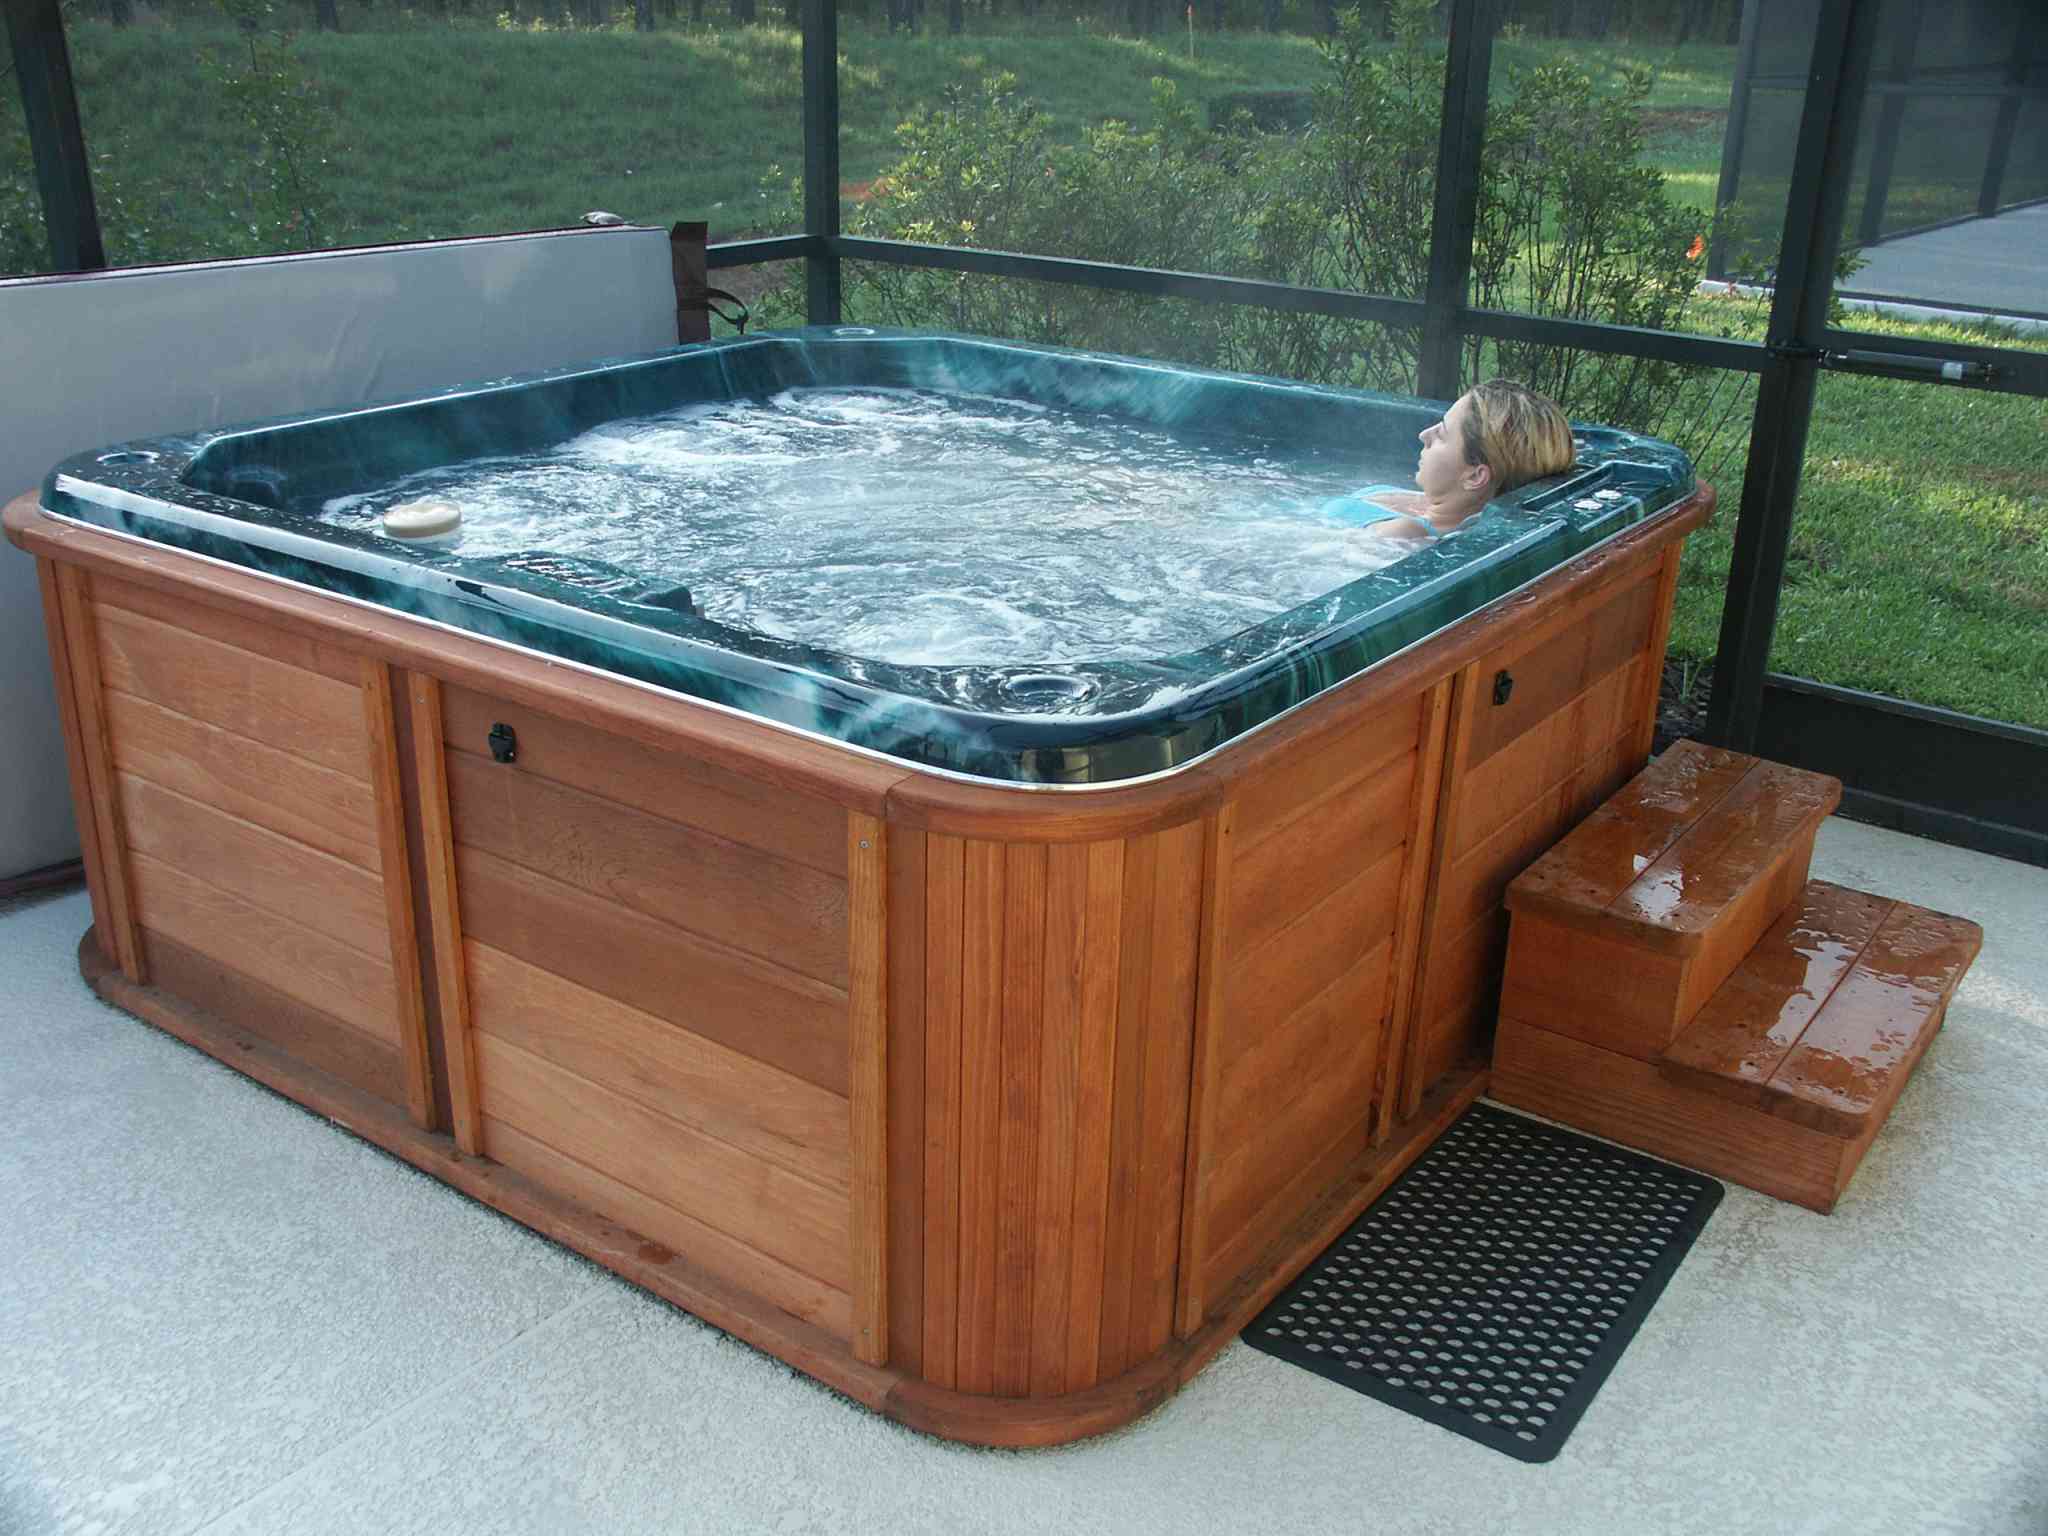 Where Should I Place My Hot Tub? 